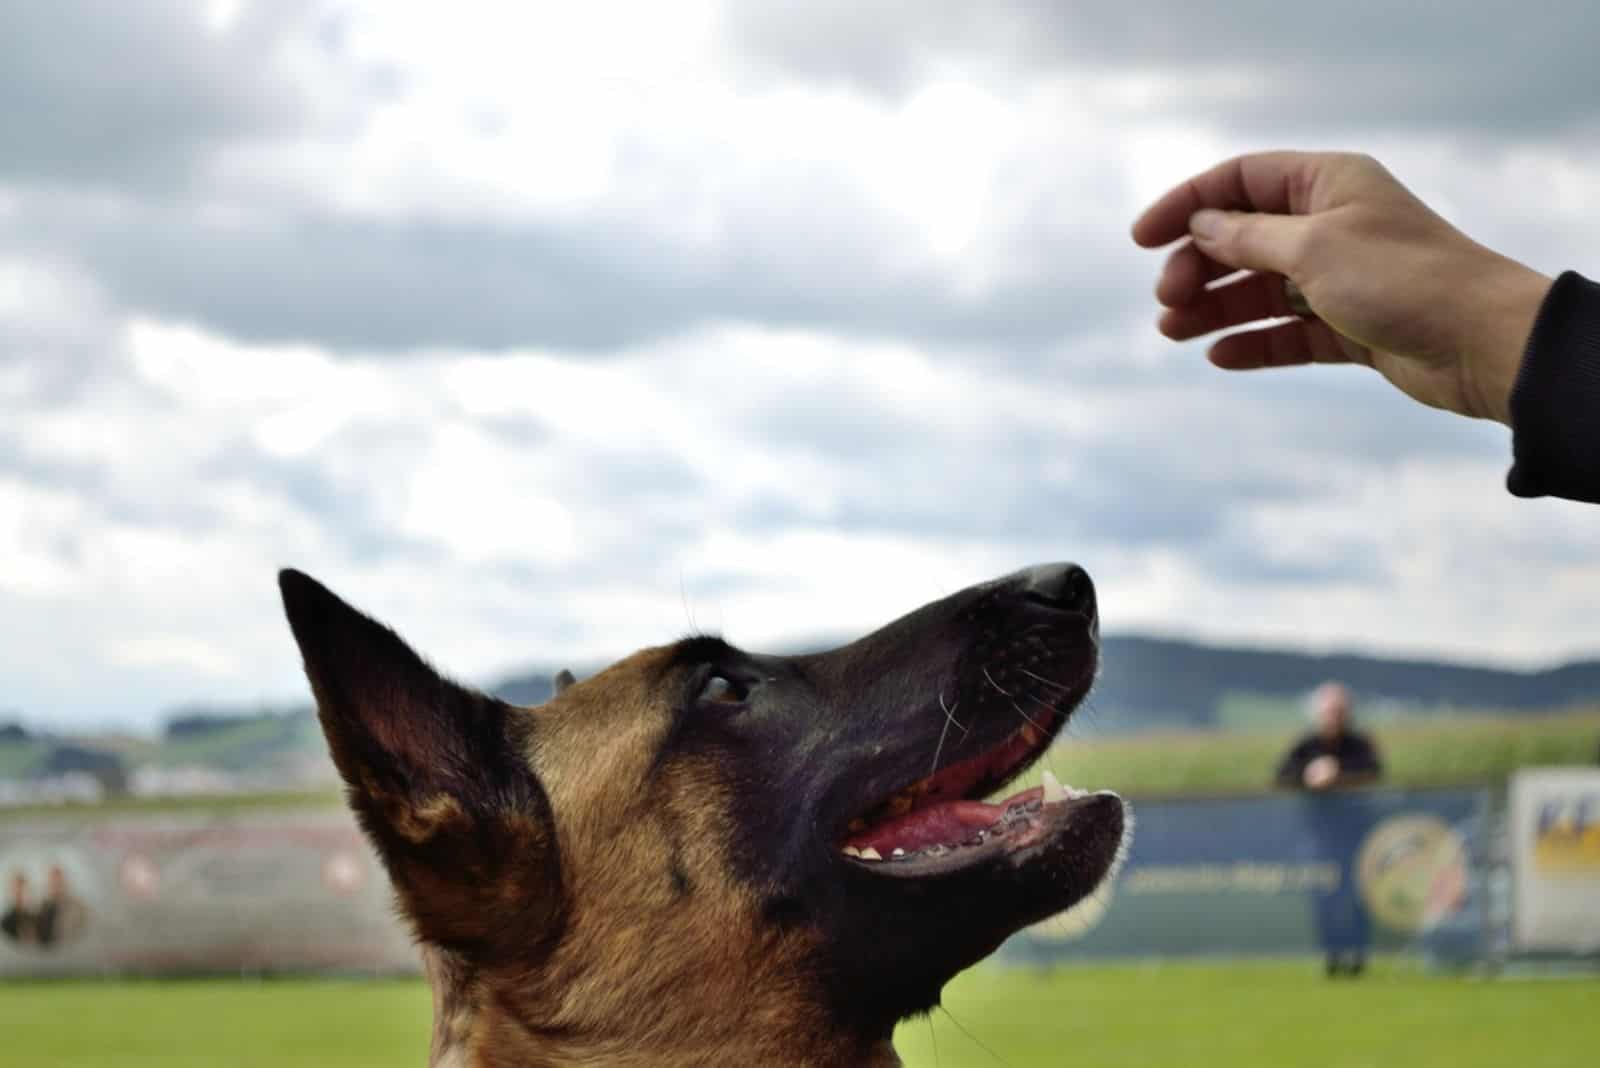 german shepherd dog looks closely at the owners hand in the park